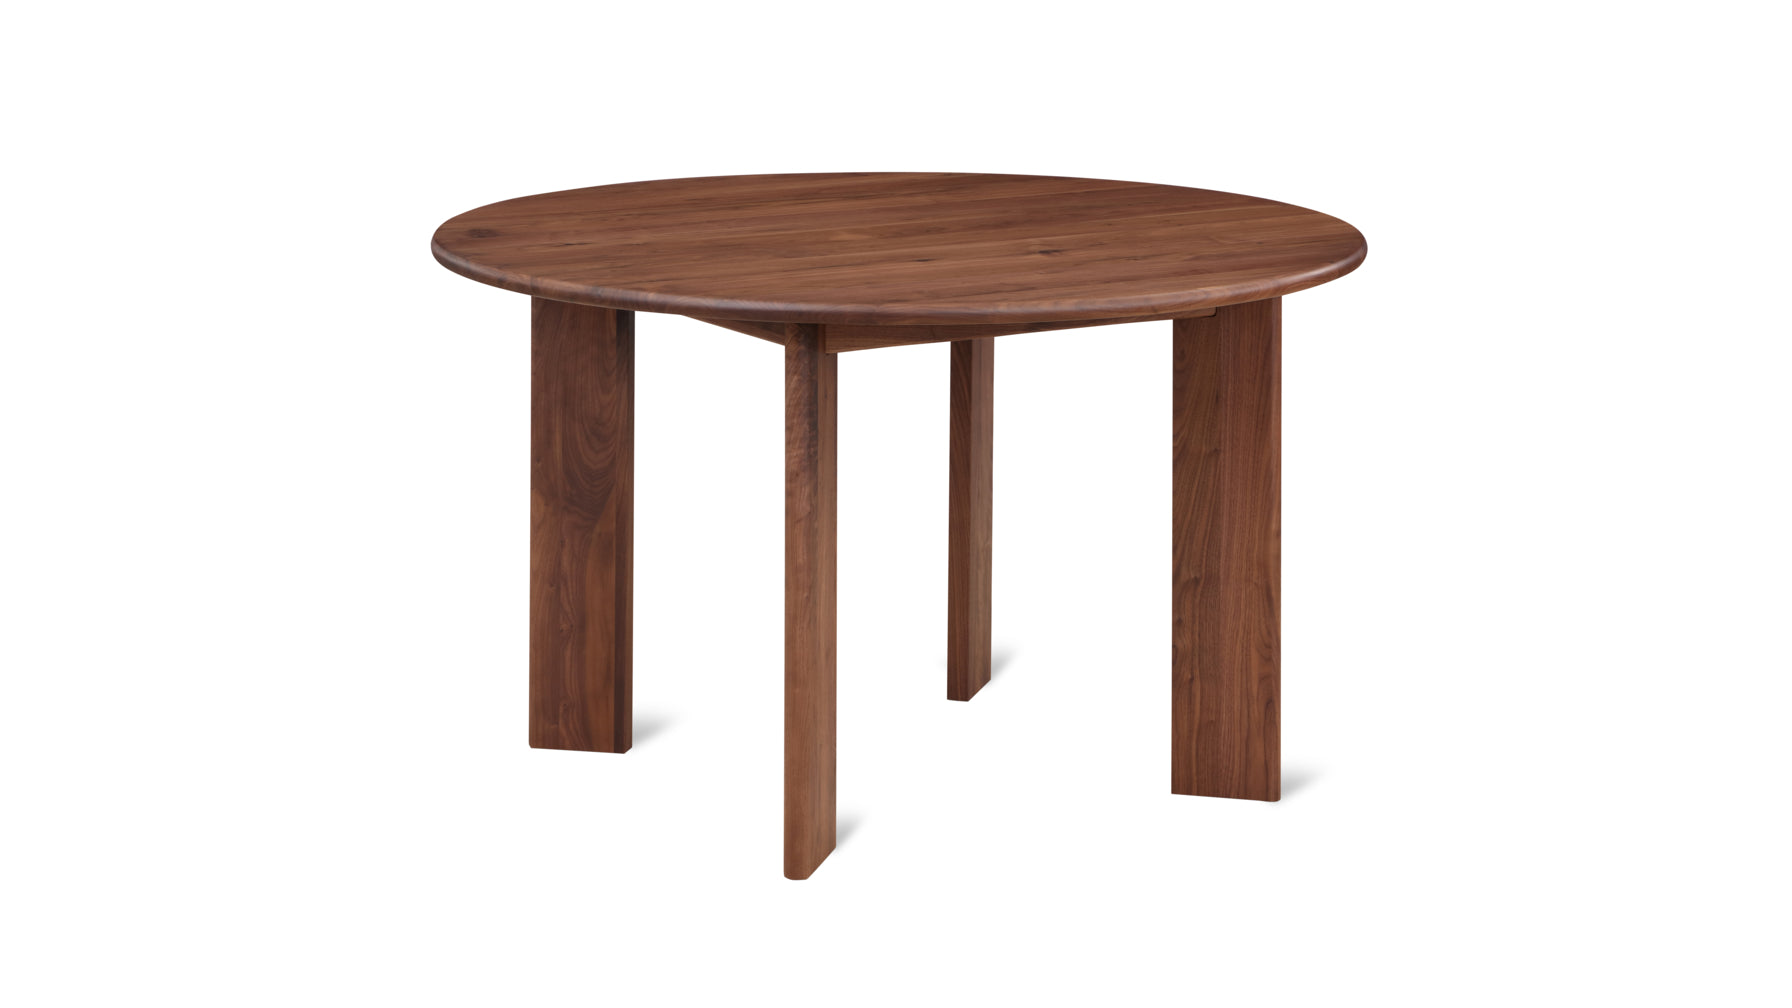 Frame Round Dining Table, Seats 4-5 People, Walnut - Image 1